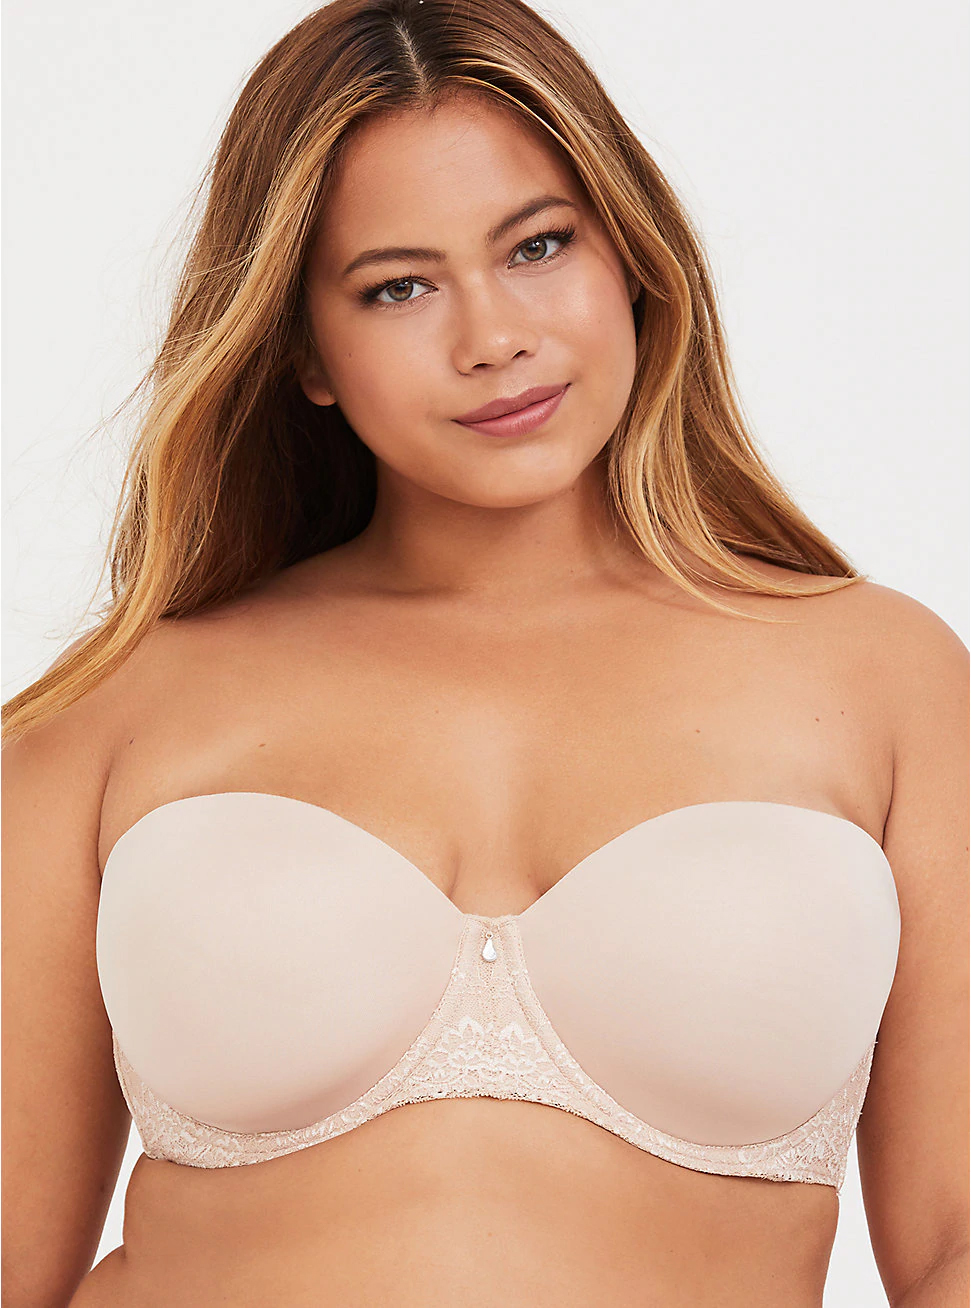 TLC Lingerie - This is a perfect example of why you can't refer yourself as  a 'D'. When you change the band size, the cup size changes too!  #tlclingerie #thebrashop #theperfectfit #perfectfitslingerie #